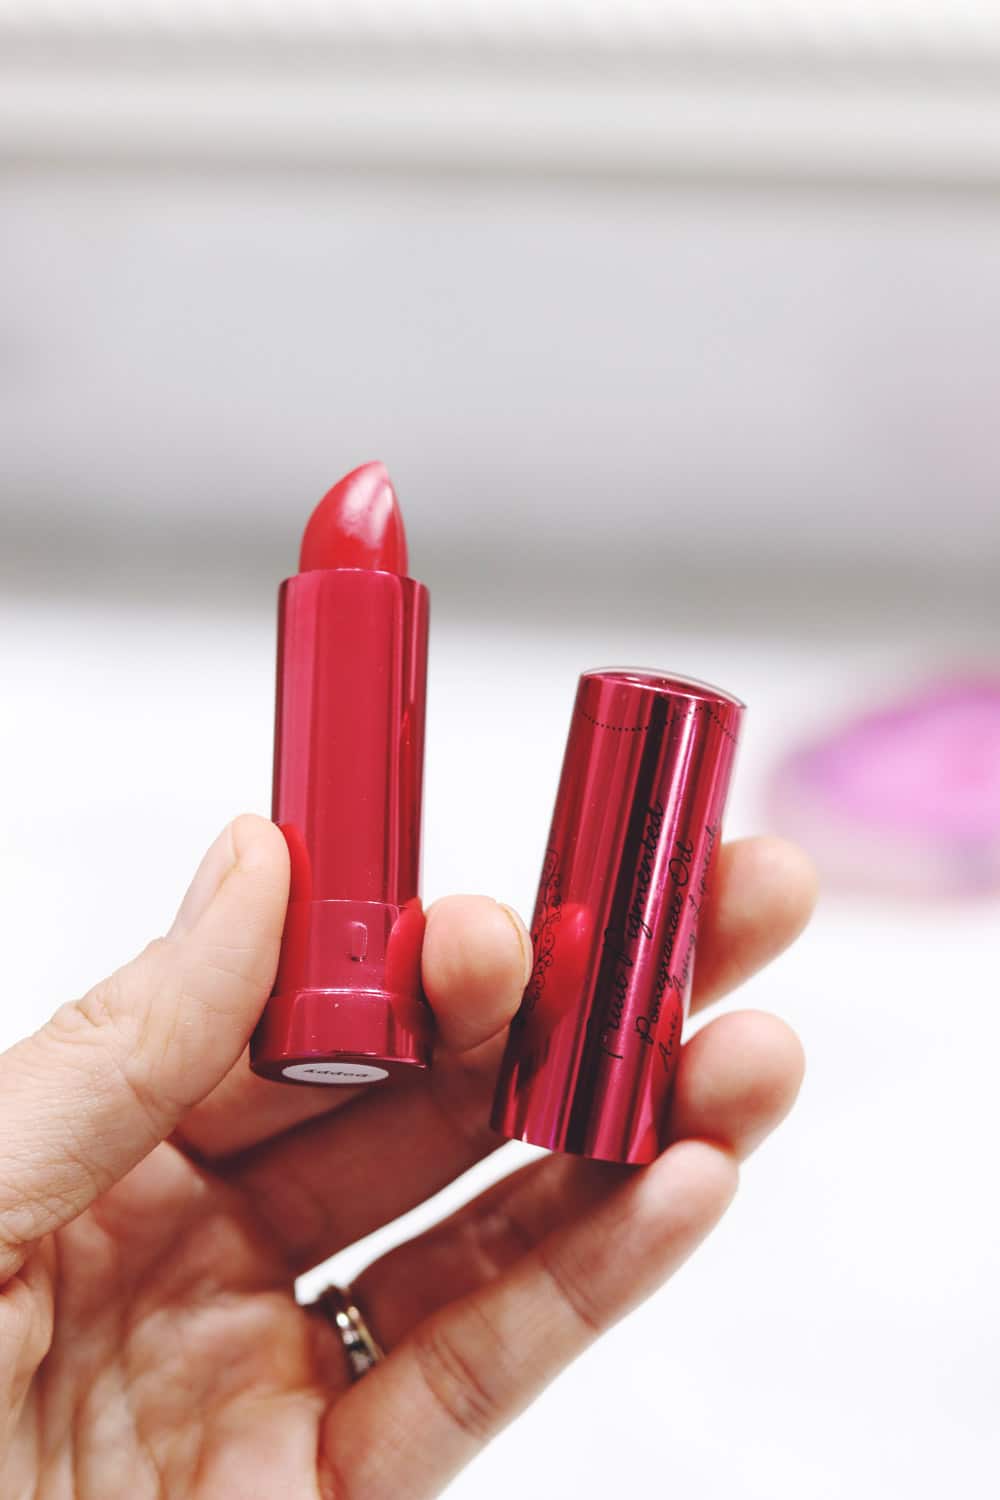 100% pure poppy lipstick, clean beauty dupe for MAC ruby woo lipstick